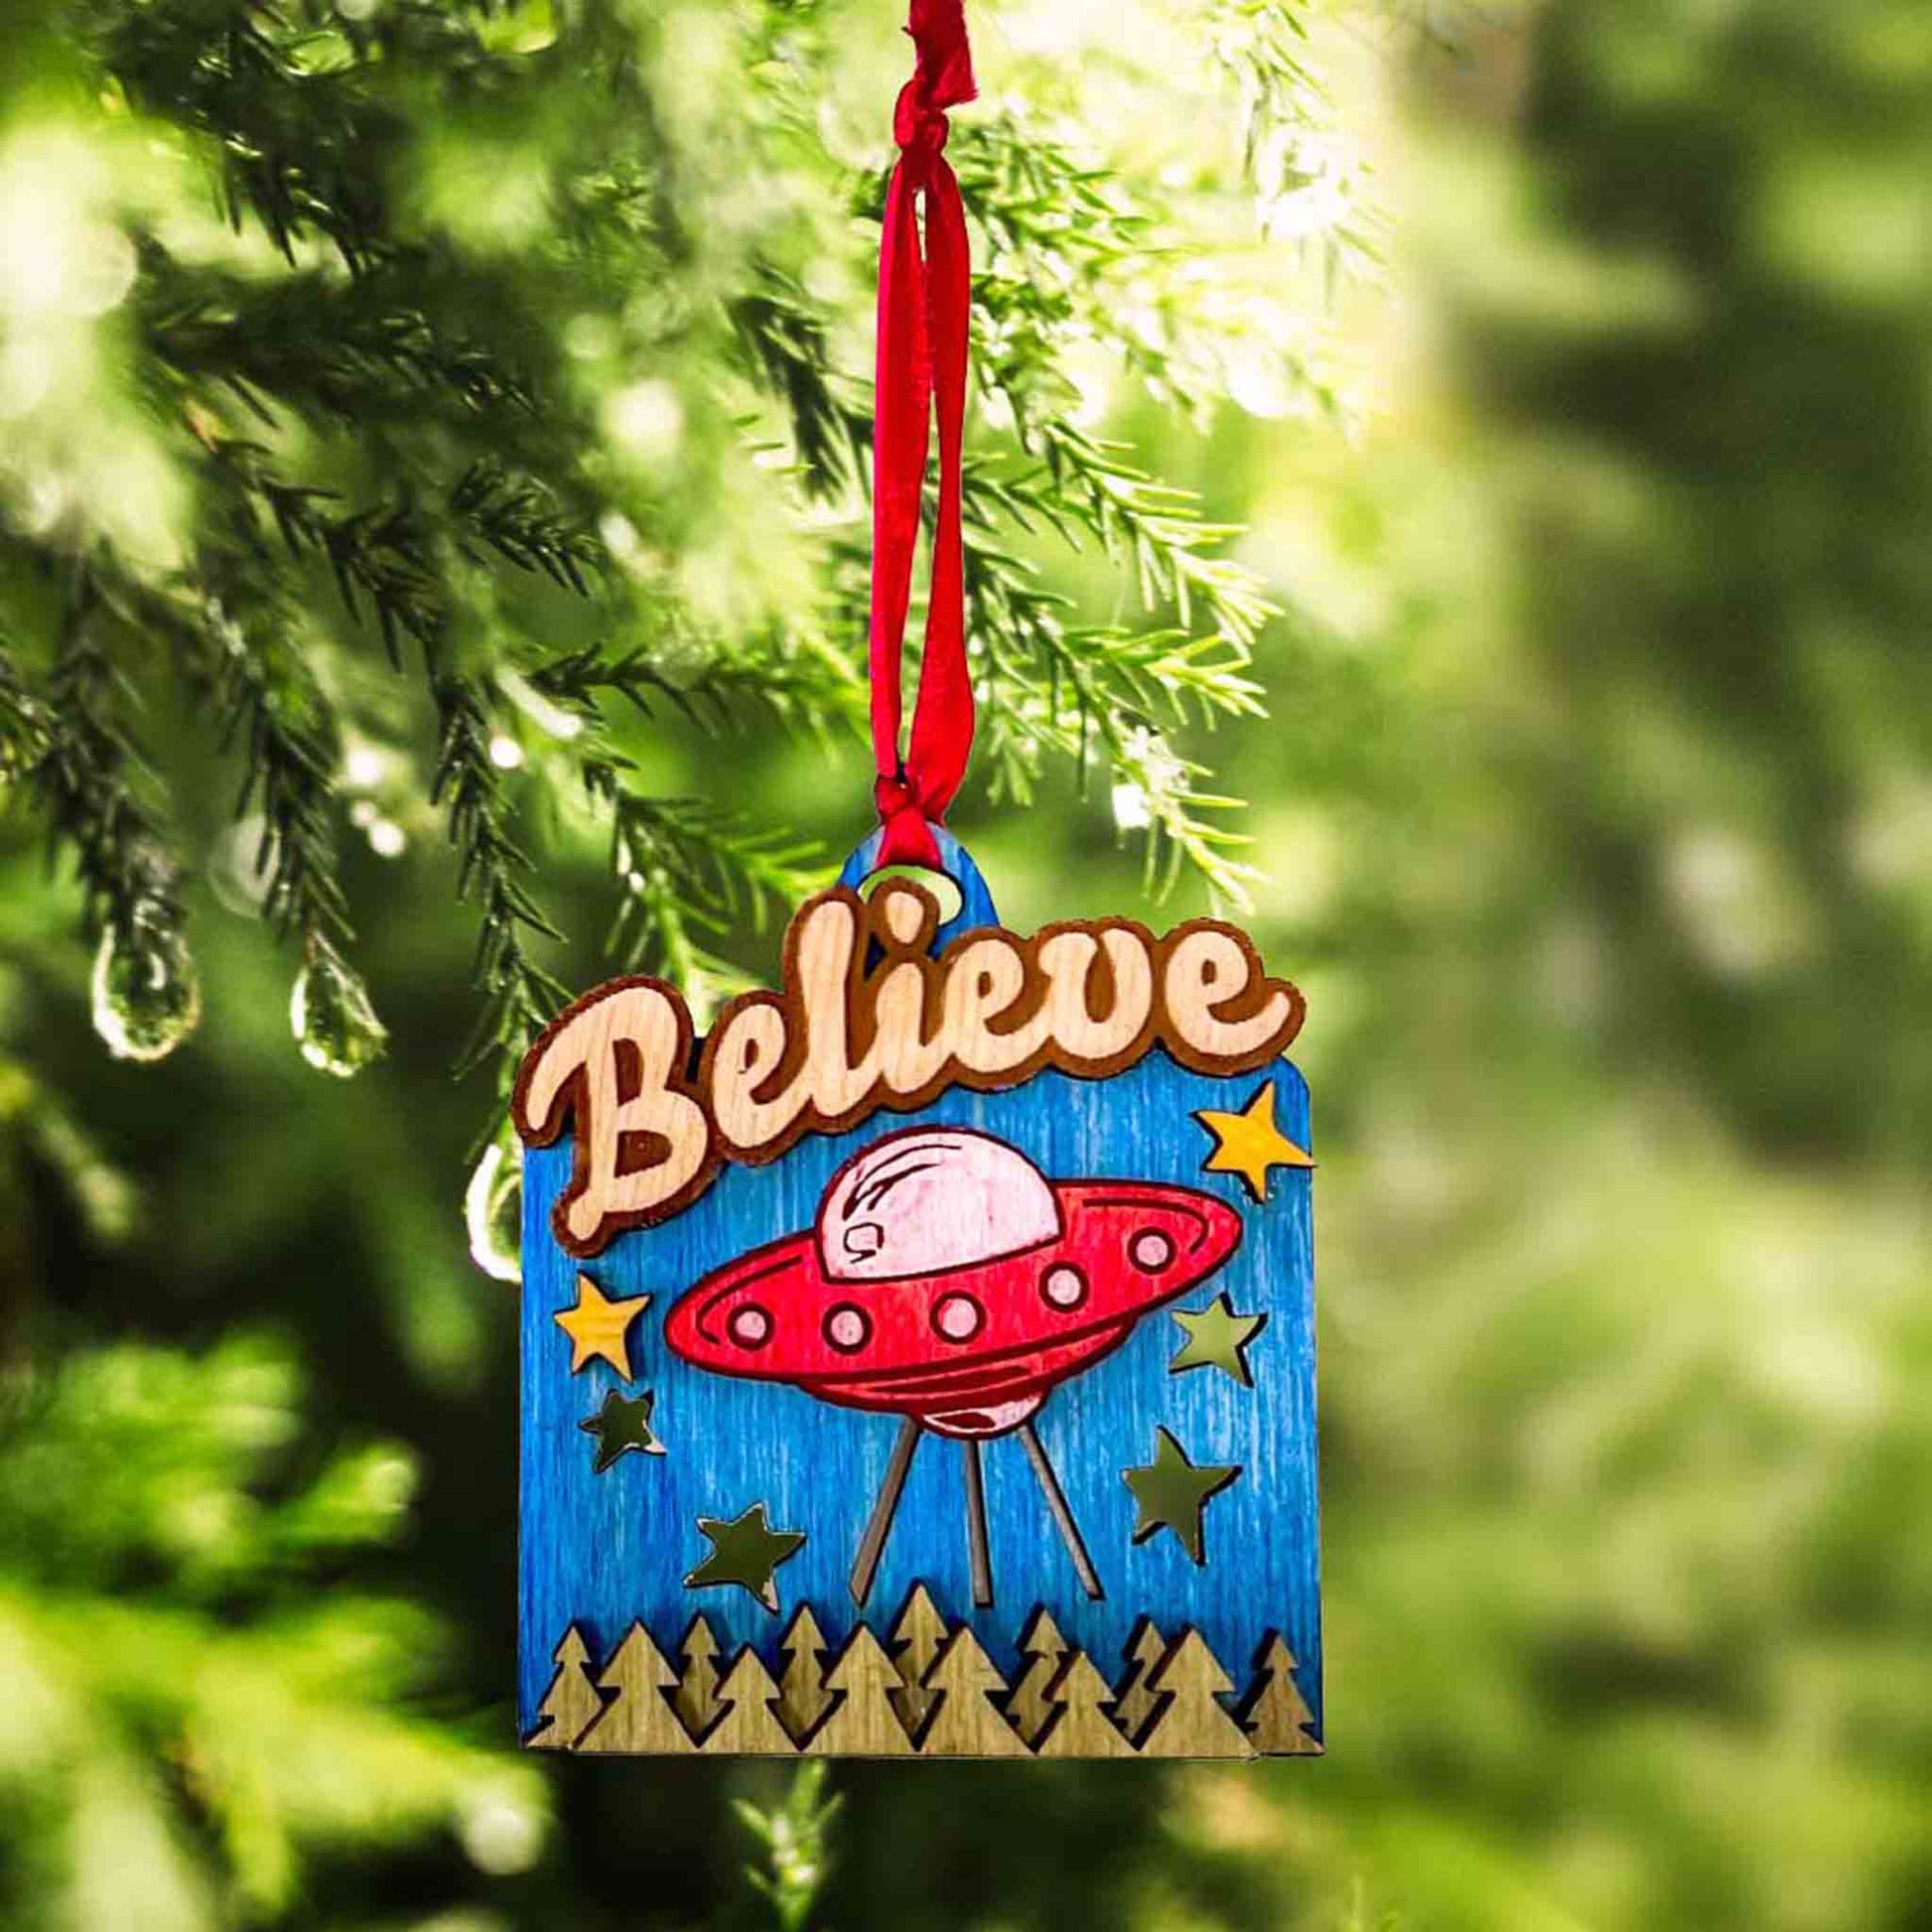 Believe UFO Holiday Hanging Decor Ornament; Believe UFO ornament; UFO ornament; alternative holiday decor; sci-fi gift; Cryptid Collection; Melasdesign Handmade Shop; believe holiday ornament; holiday hanging decor; funny christmas ornament; Melasdesign Handmade; Thomas WV